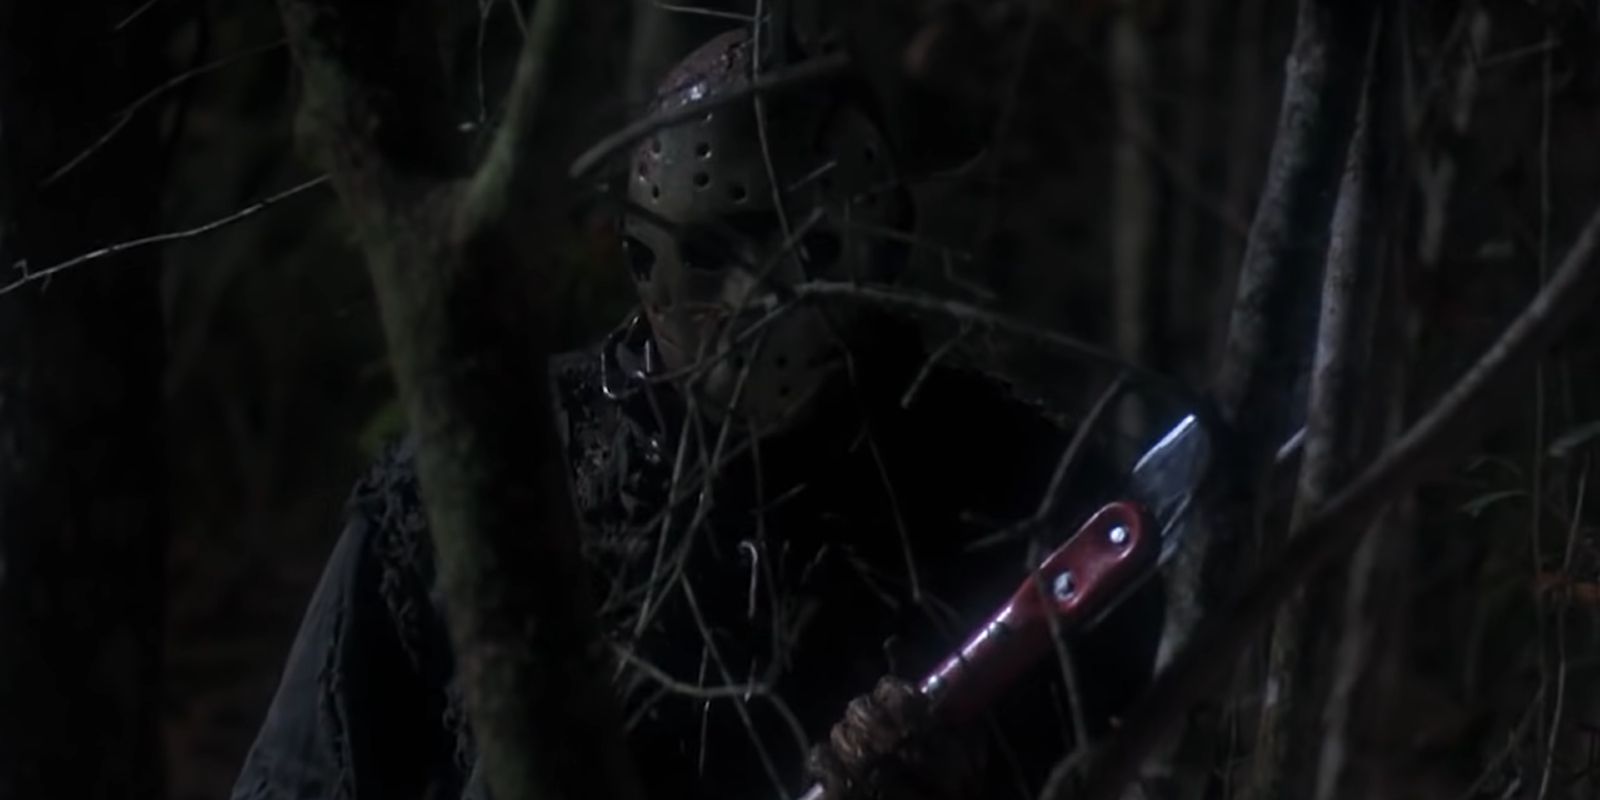 Jason Wielding Tree-Trimmer - Friday The 13th Part VII The New Blood